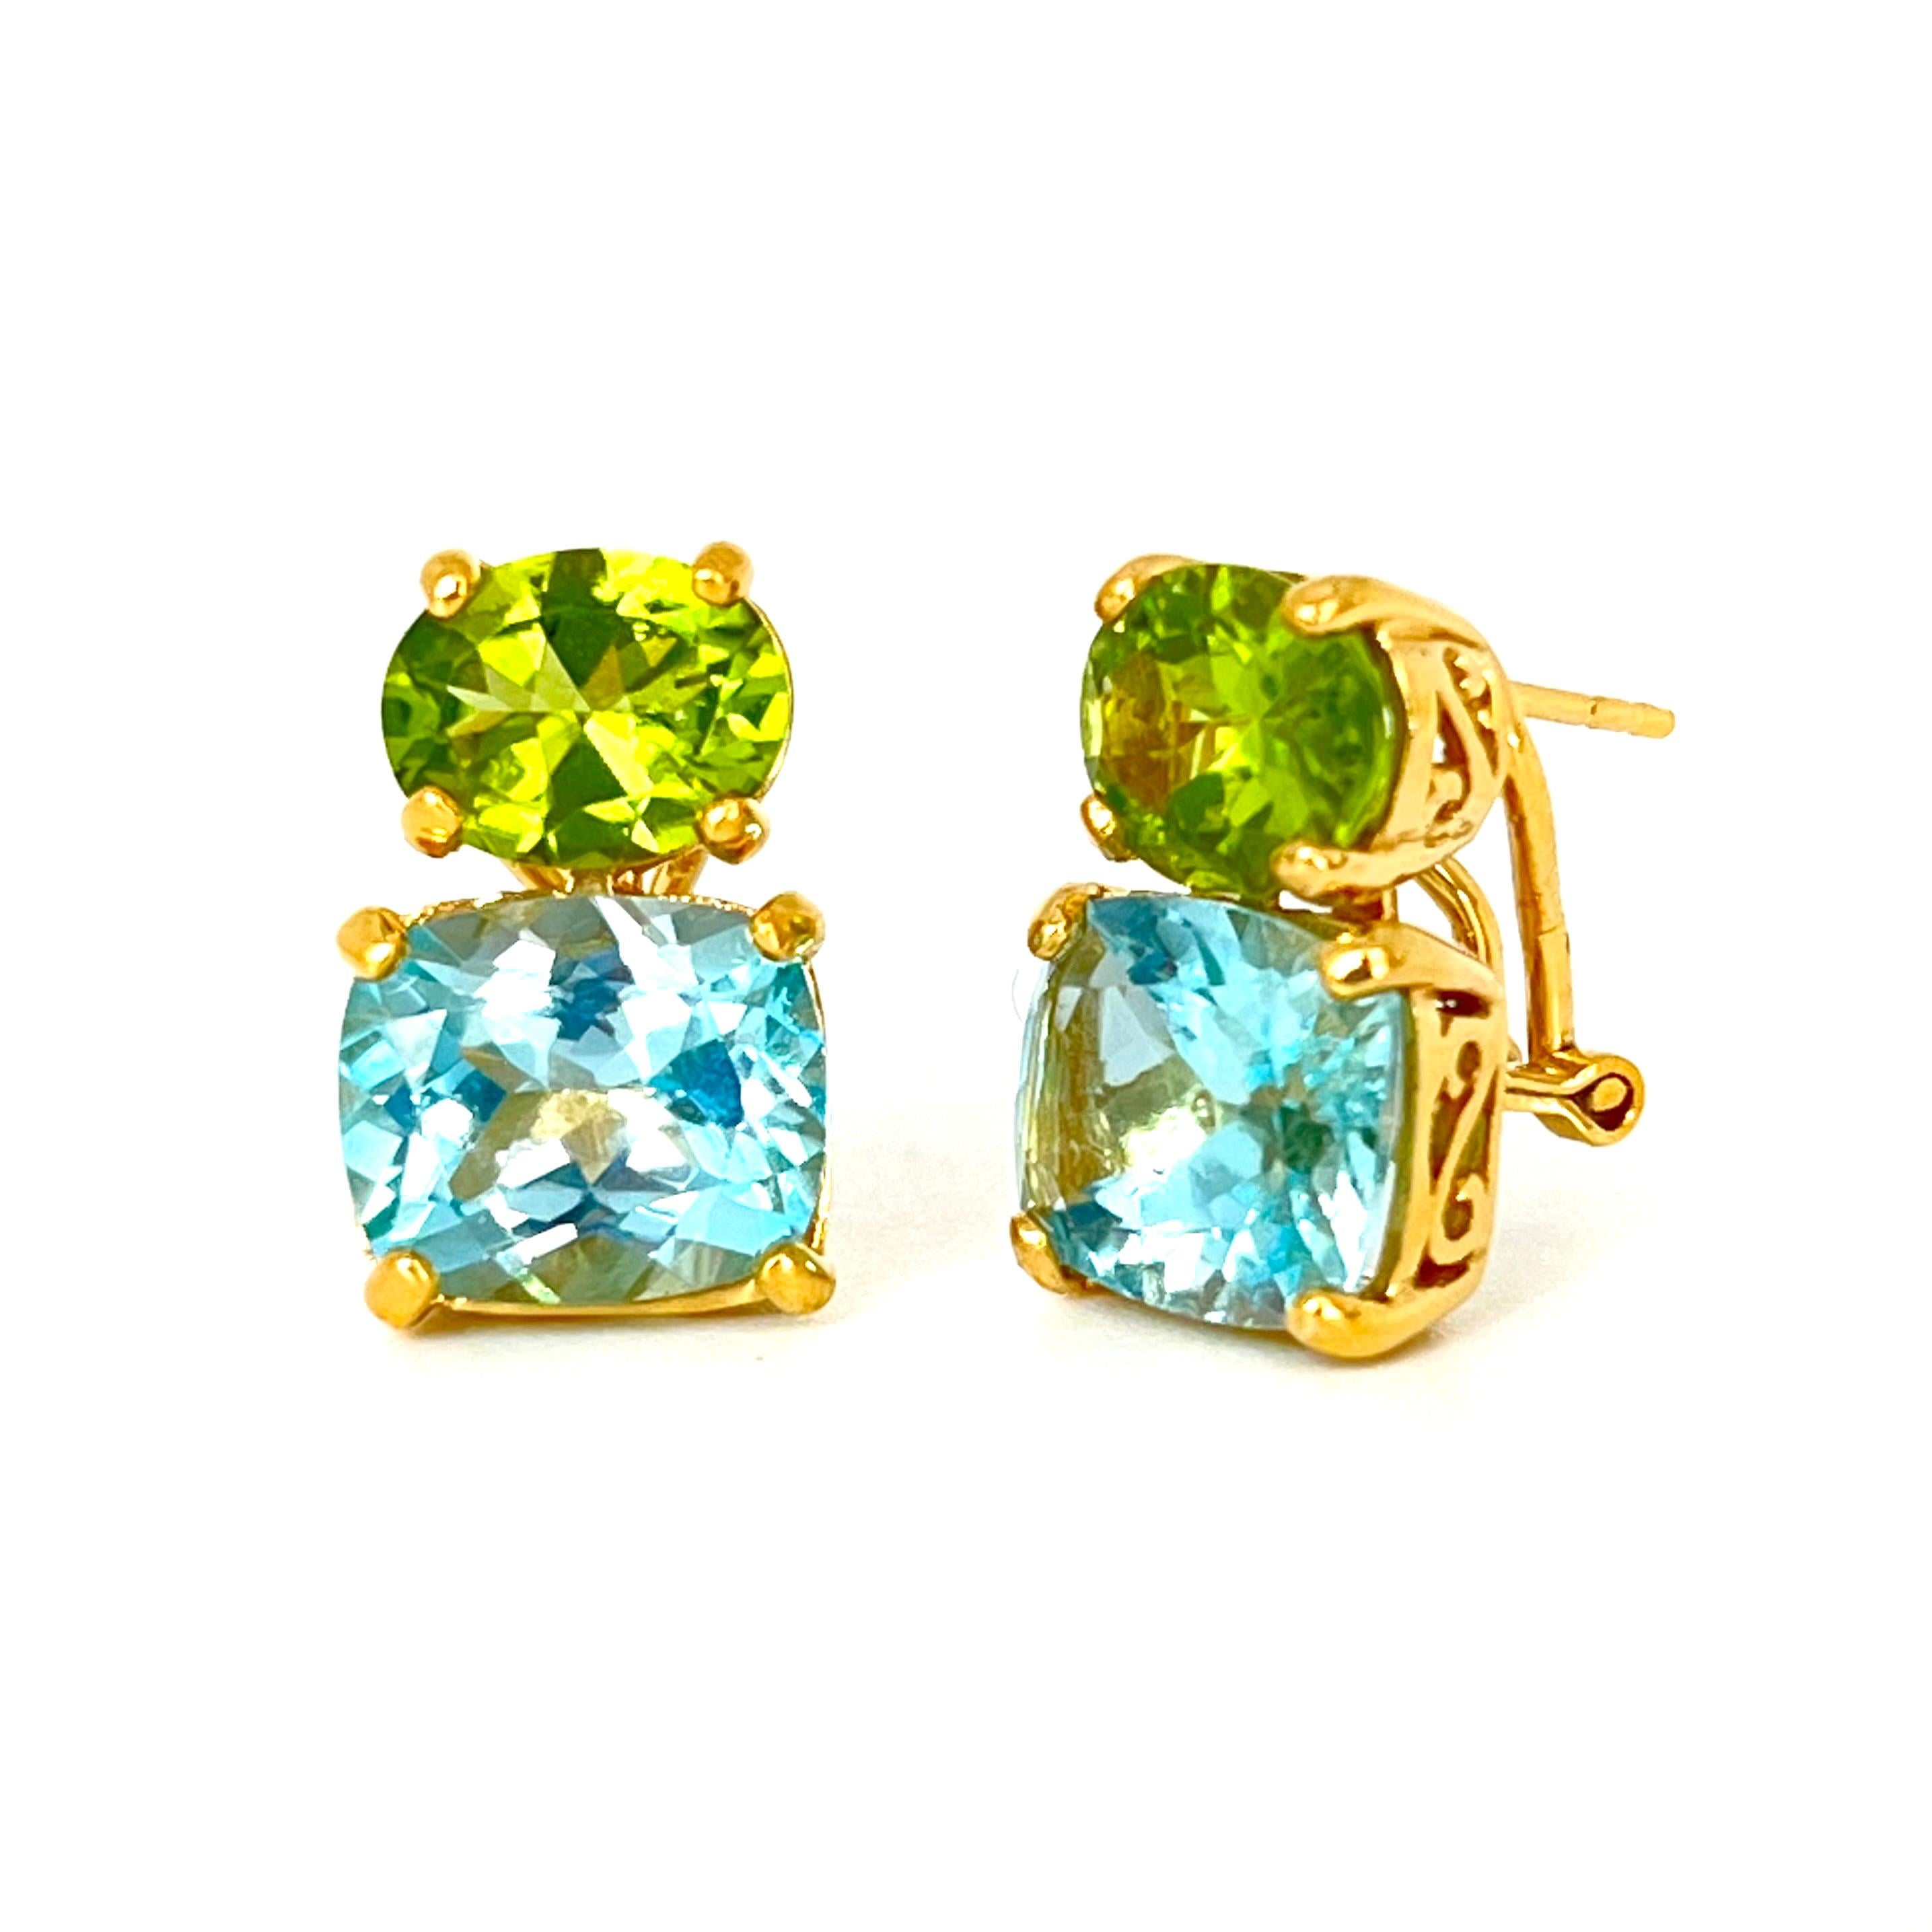 Stunning Genuine Oval Peridot and Cushion-cut Blue Topaz Vermeil Earrings In New Condition For Sale In Los Angeles, CA